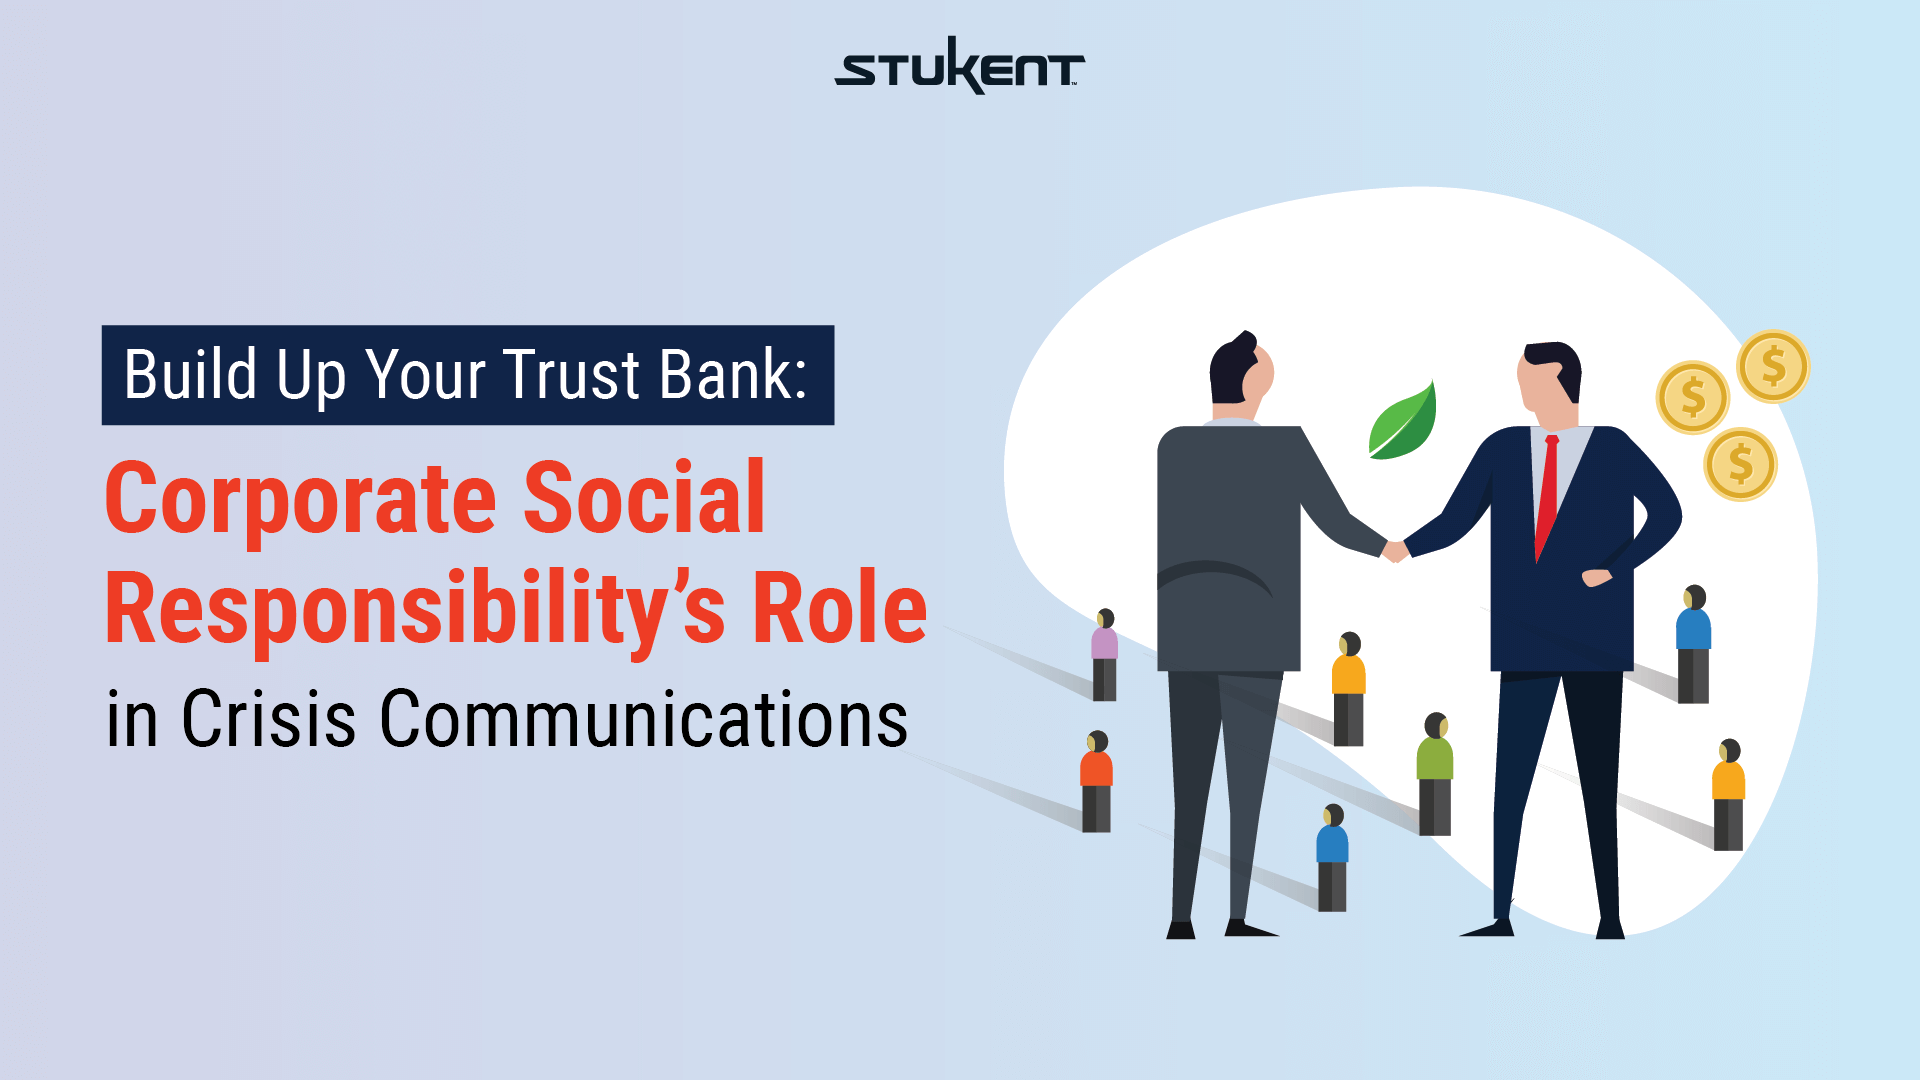 Build Up Your Trust Bank: Corporate Social Responsibility's Role in Crisis Communications